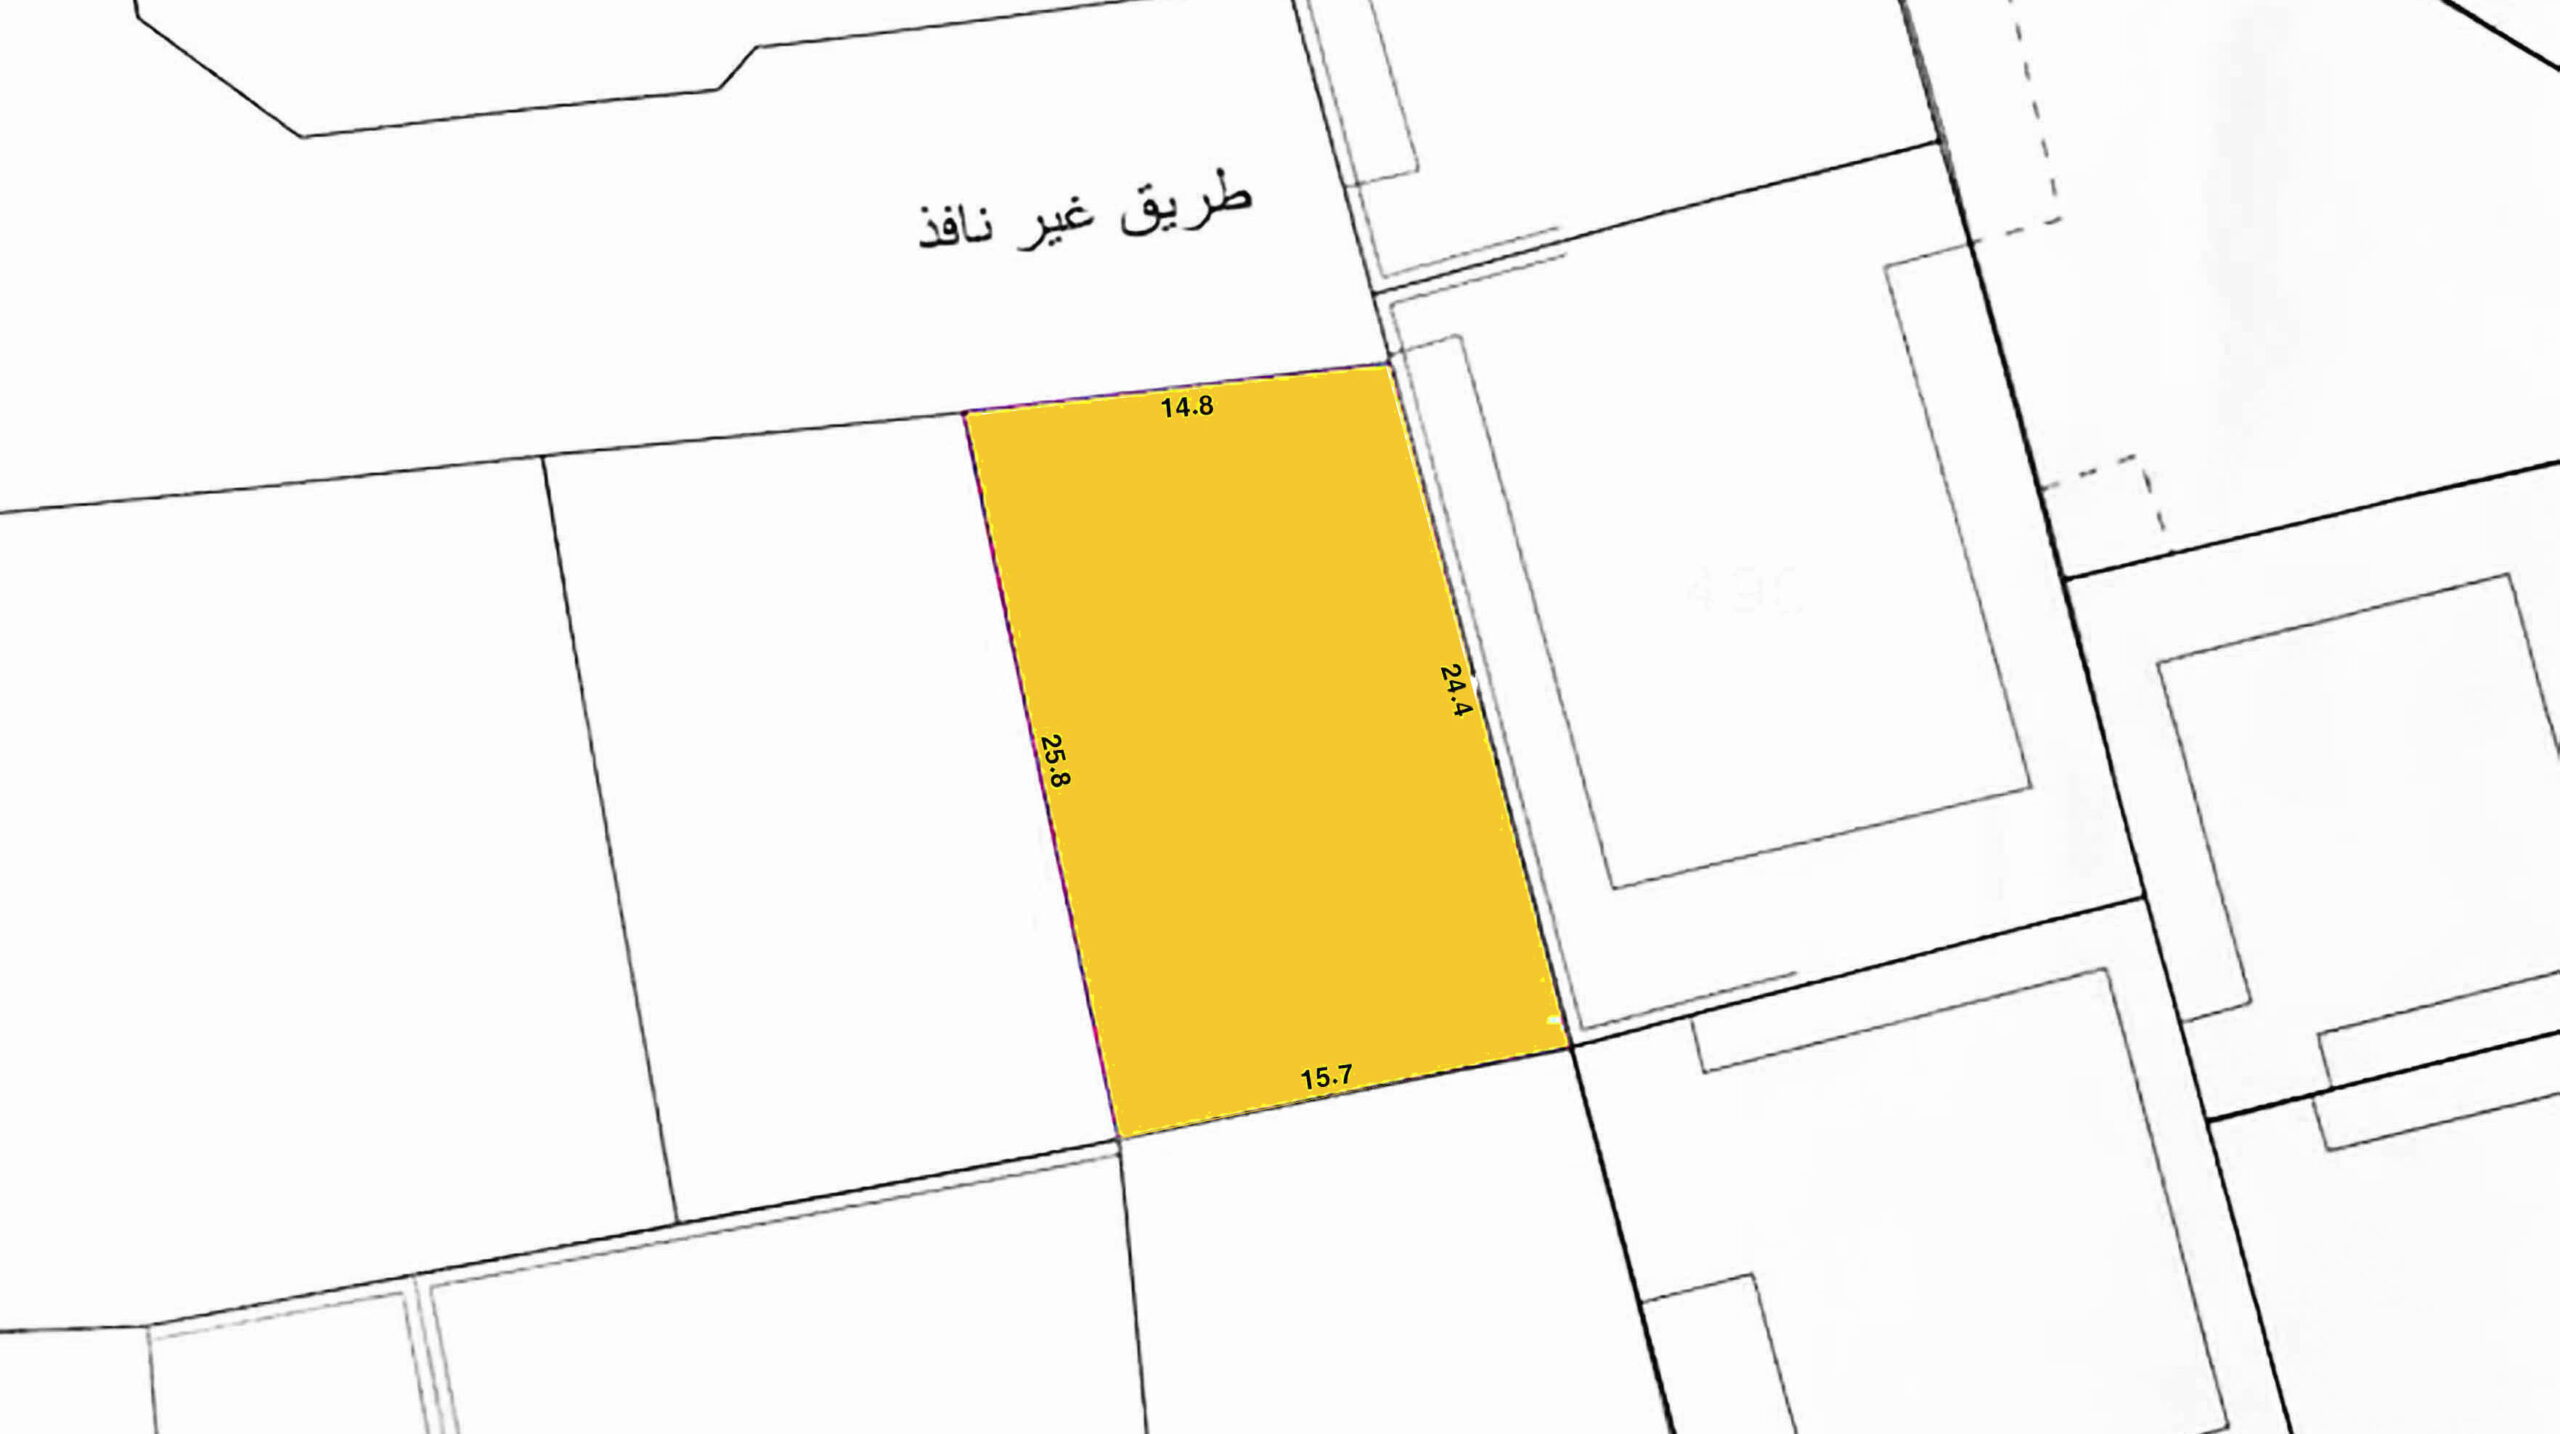 Land for sale RB located in Tubli